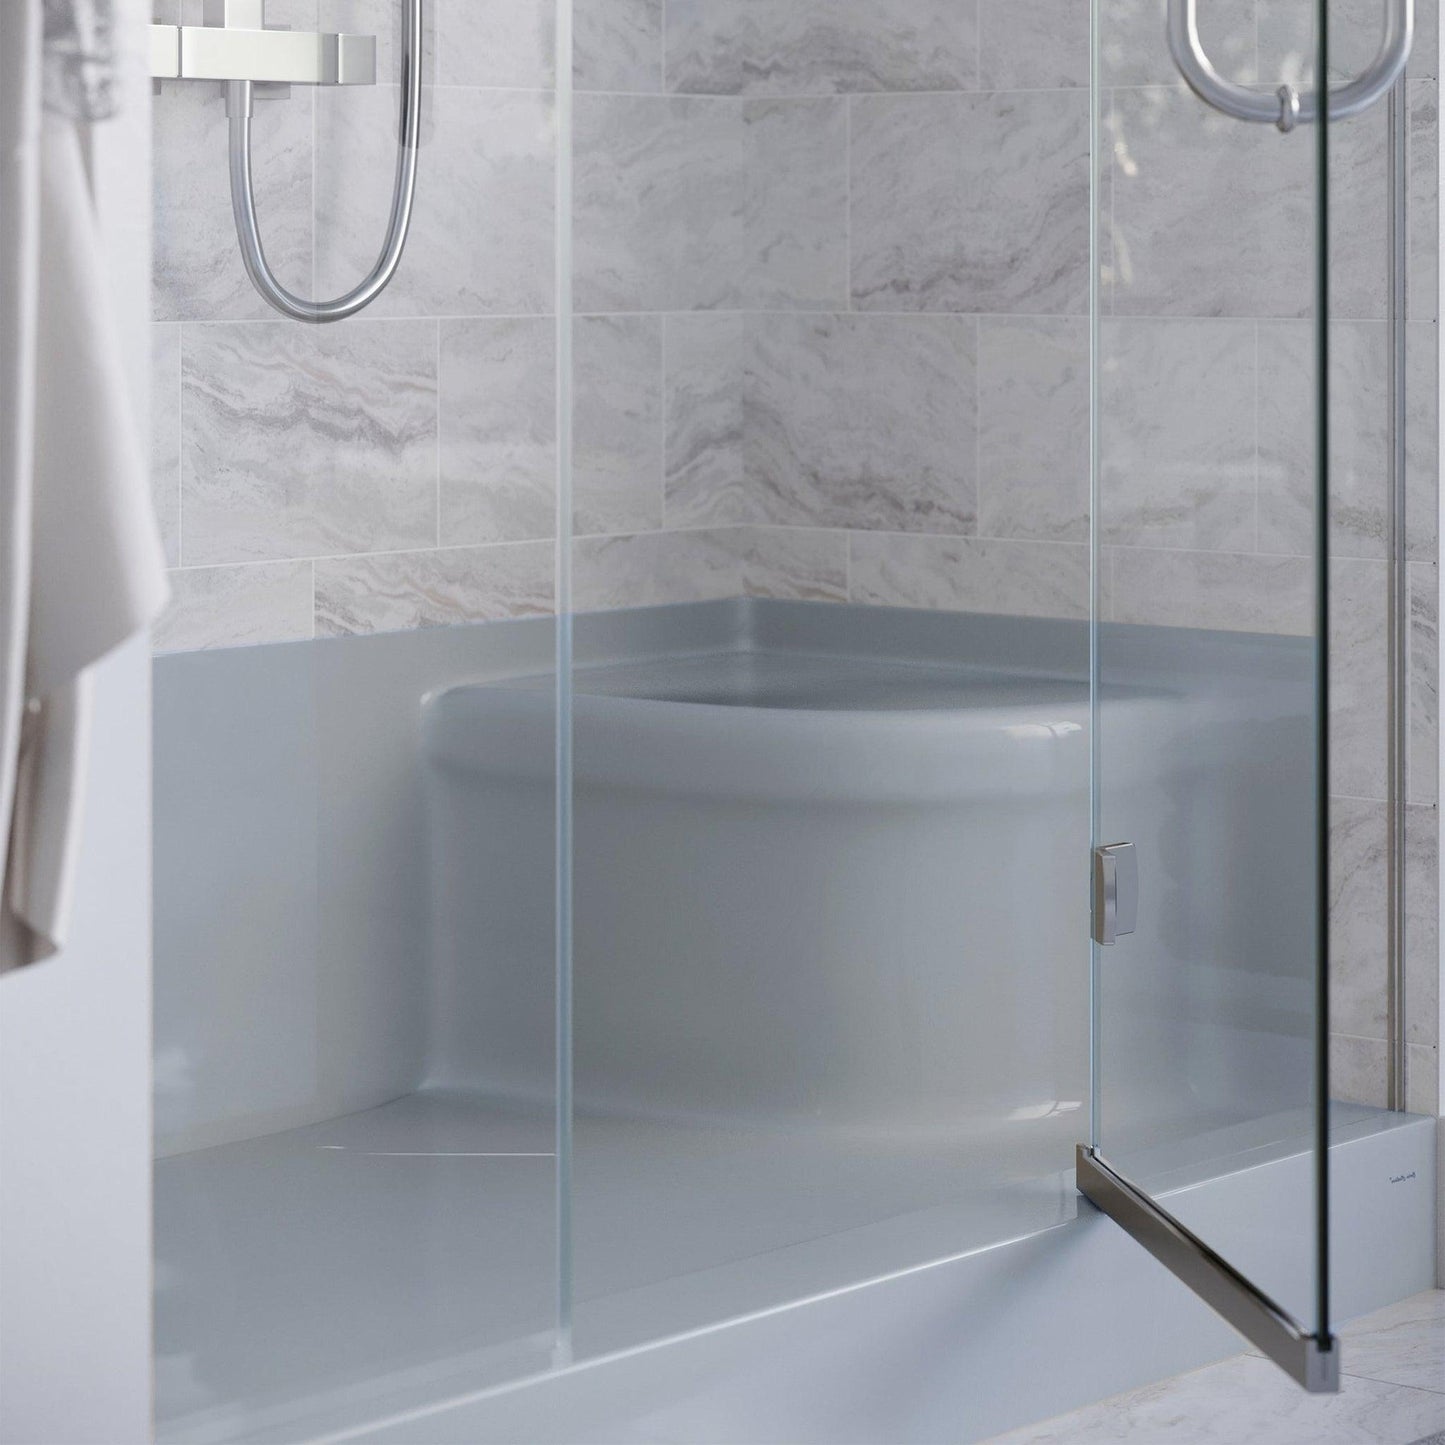 Swiss Madison Aquatique 60" x 32" Three-Wall Alcove Gray Left-Hand Drain Seated Shower Base With Built-In Integral Flange and Integrated Seat